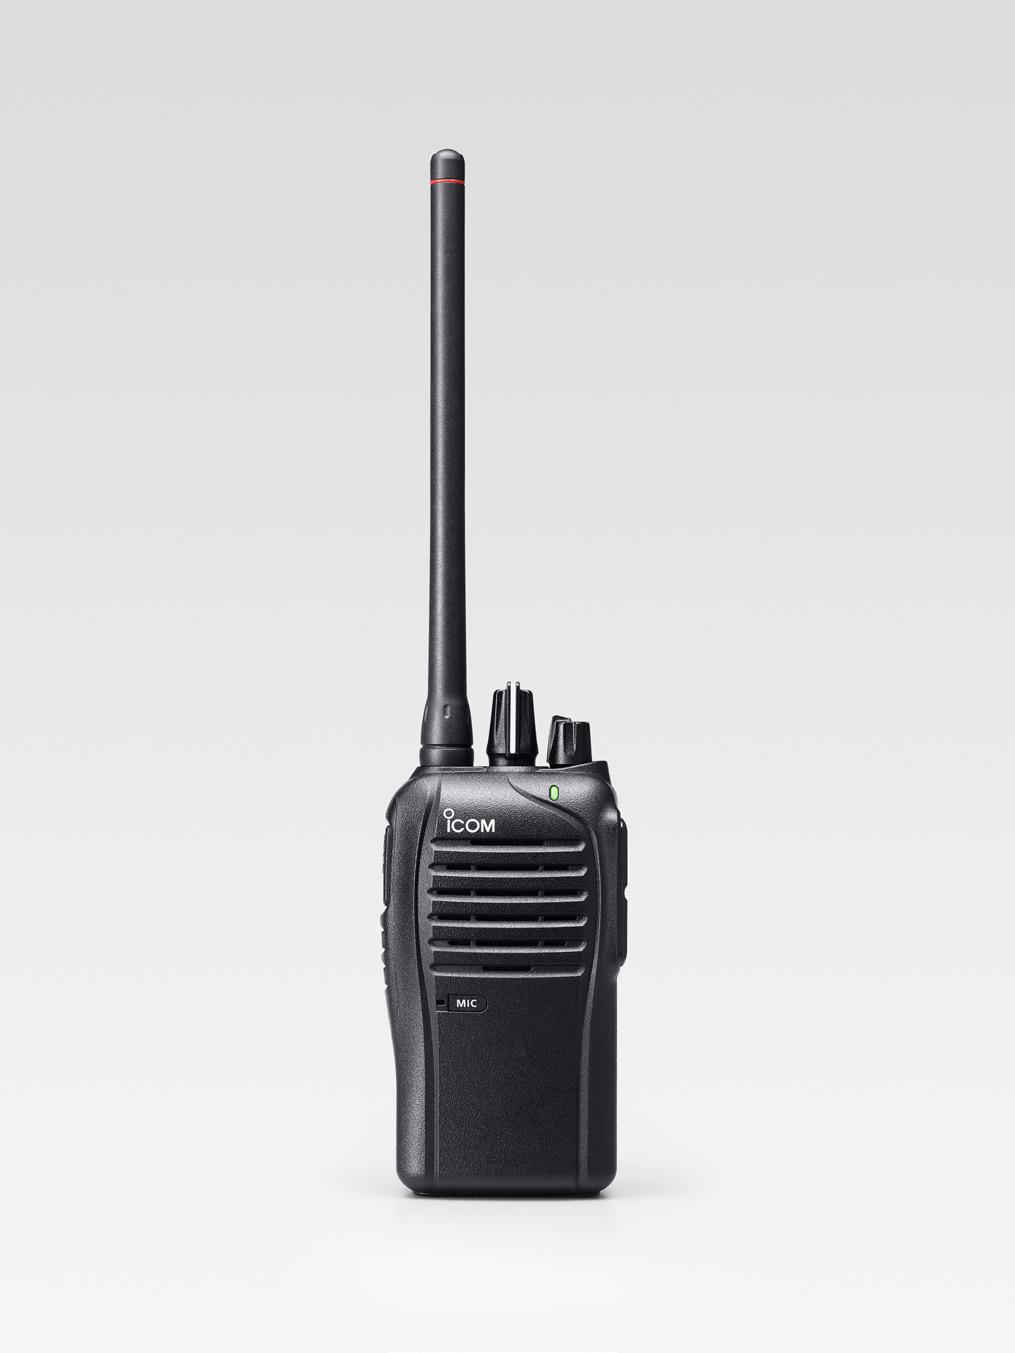 Limited functions only INSTRUCTION MANUAL Limited functions only VHF TRANSCEIVERS if100d Series UHF TRANSCEIVERS if4100d Series This device complies with